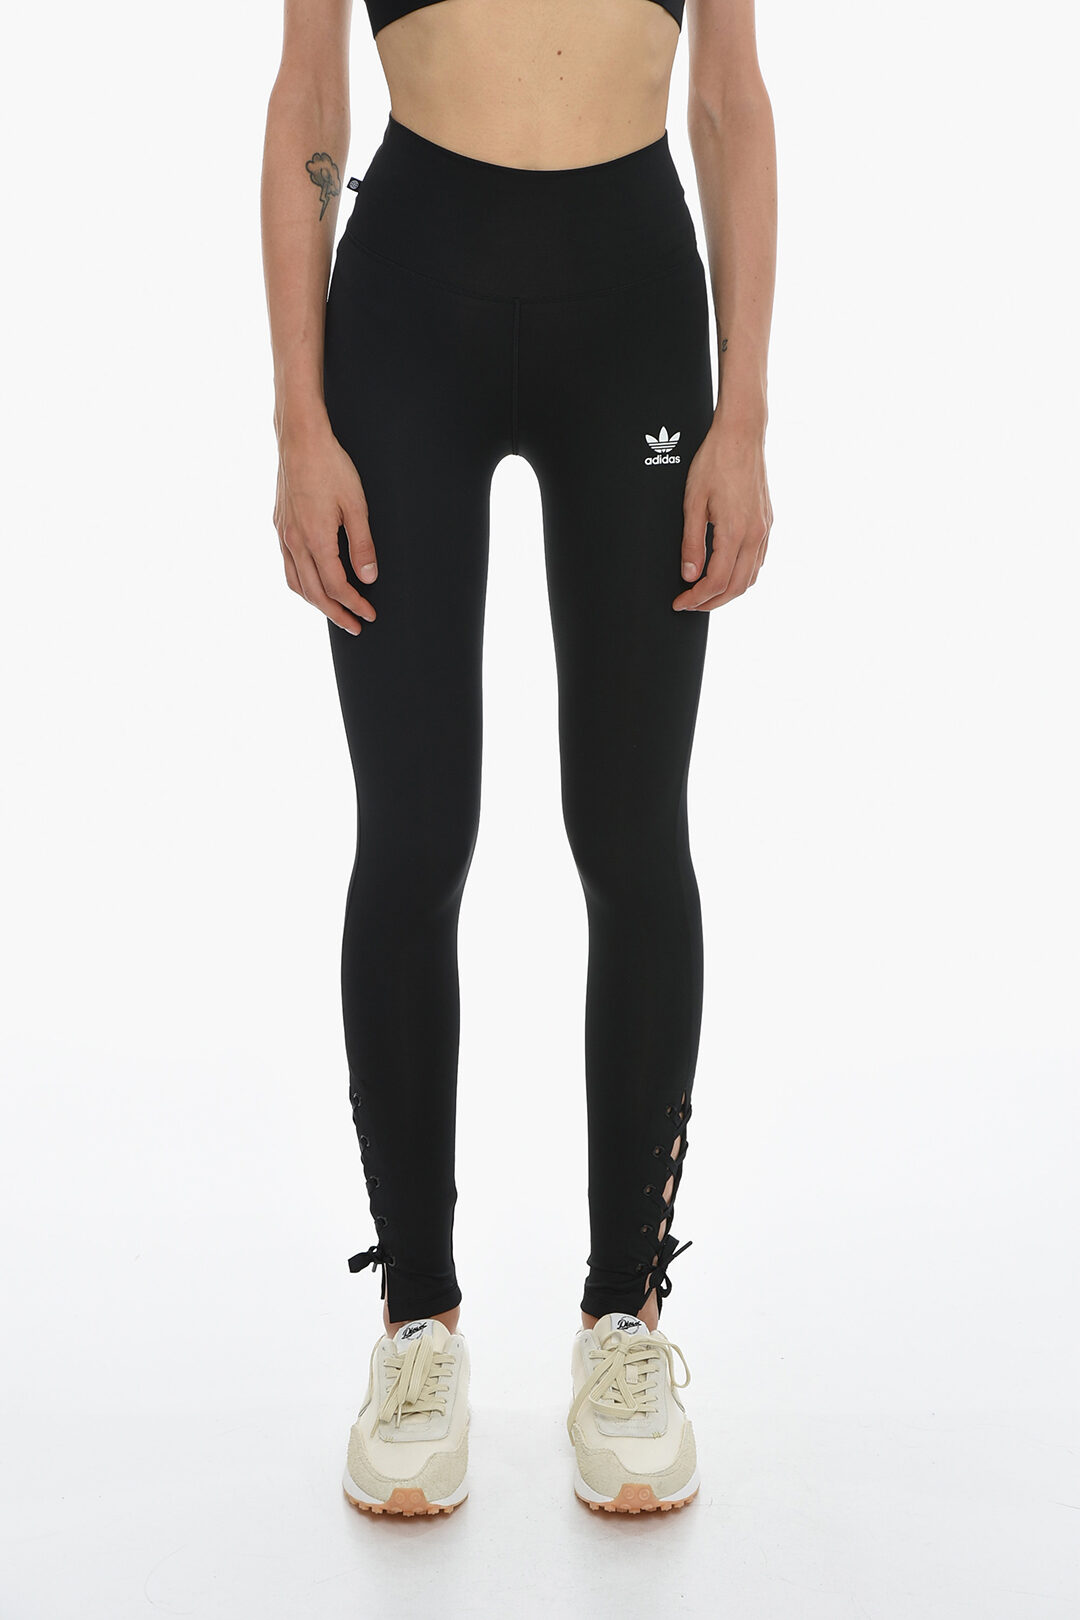 High-Waisted Tight Fit Leggings with Lace-up Detail